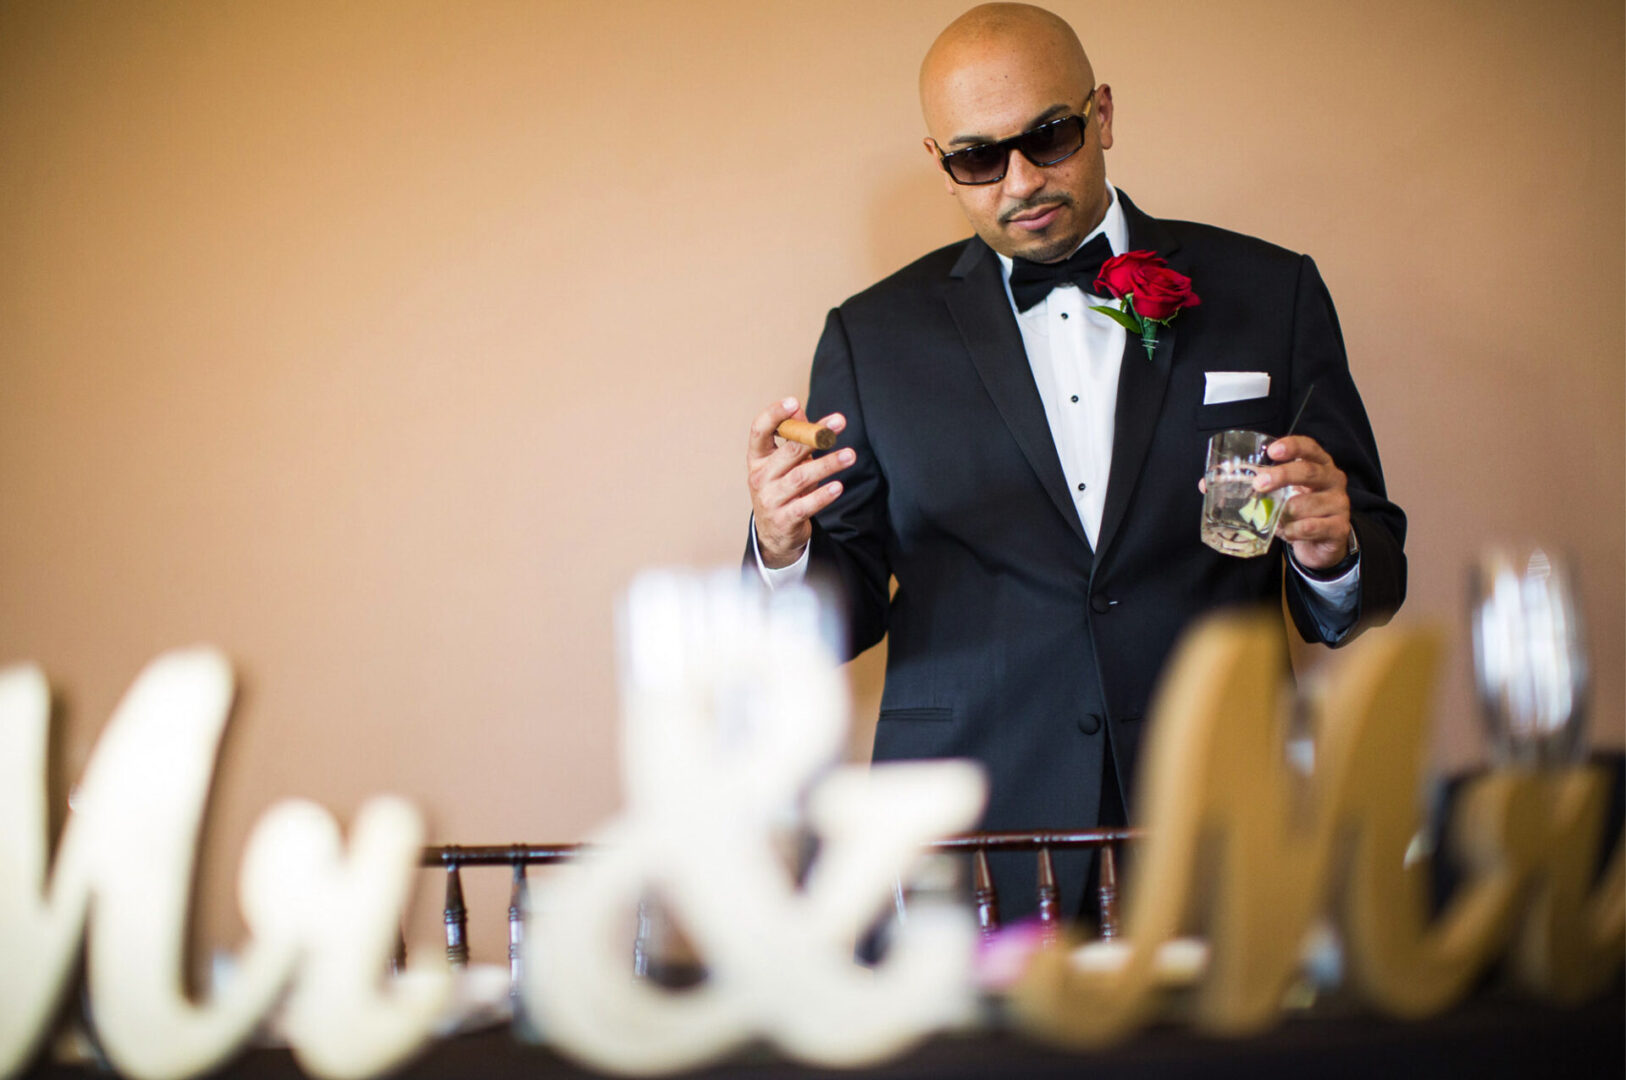 A groom holding a glass of drink and cigar in hand